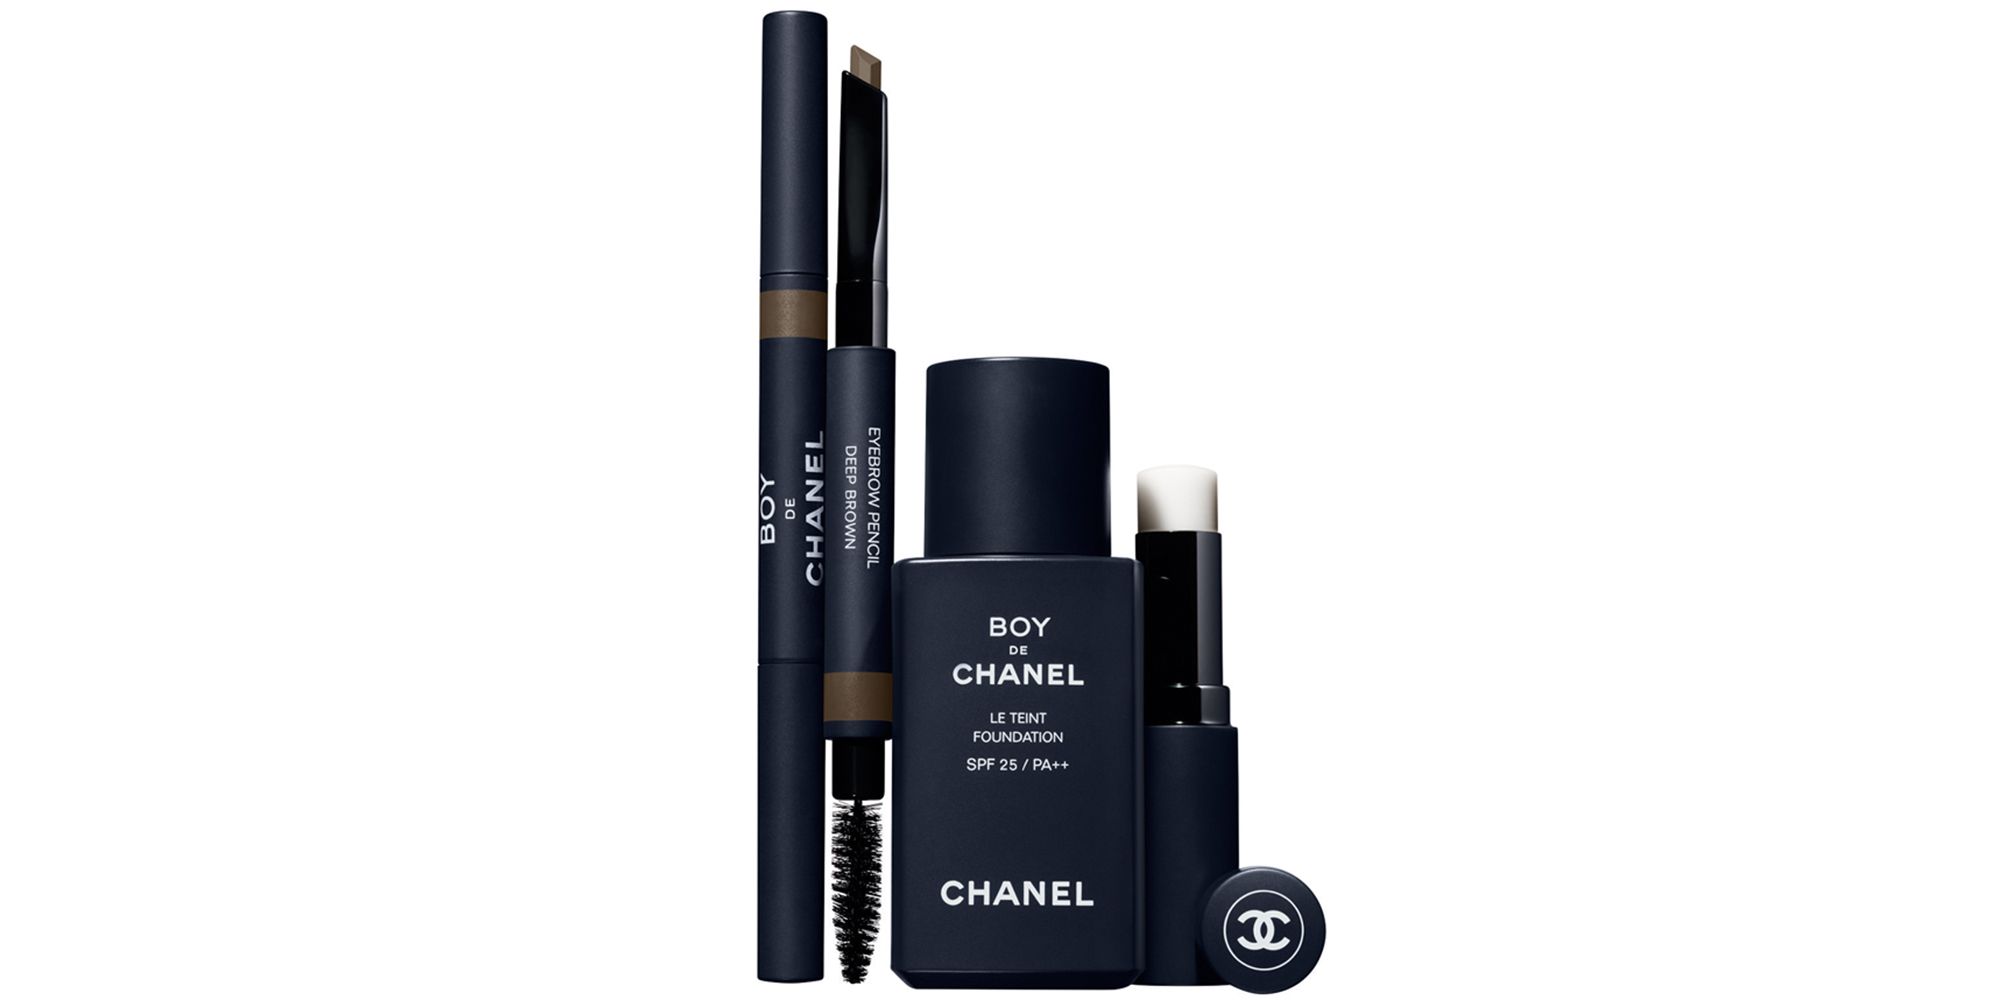 ur Orkan Derved Chanel Is Launching a Makeup Line For Men - Chaney Boy de Chanel  Foundation, Eyebrow Pencil, Lip Balm